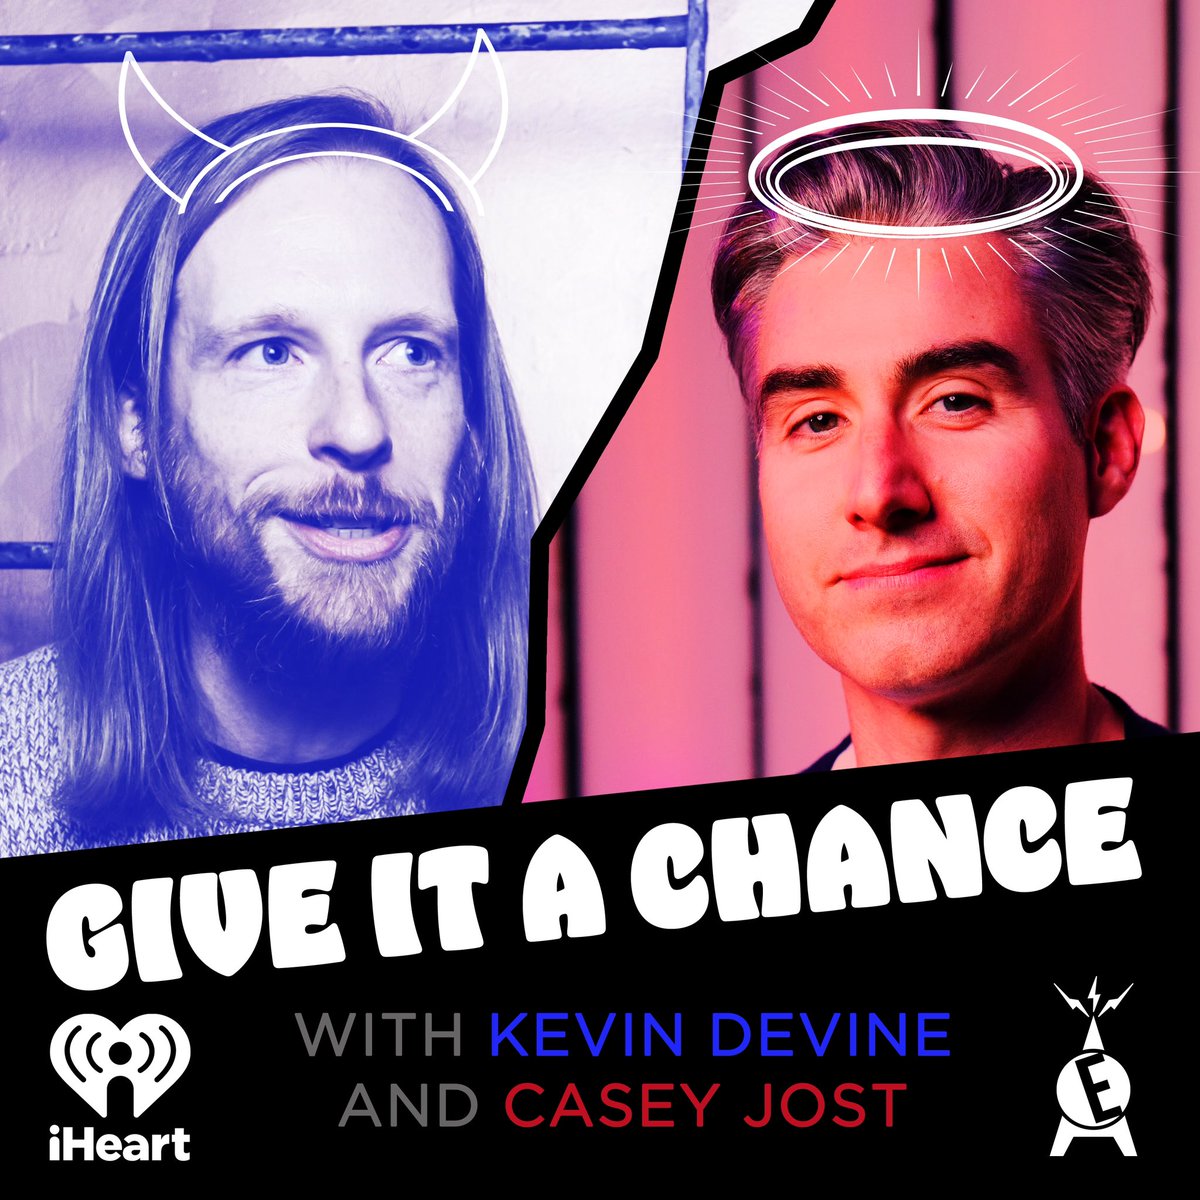 🧵: Meet GIVE IT A CHANCE, a new podcast featuring the homie @CaseyJost & I, launching Thursday 4/25 on the @elvisduran Podcast Network, presented by @iHeartRadio. Listen to a preview today on the iHeartRadio app, Apple, Spotify, Pandora, and Amazon (links at end of thread).